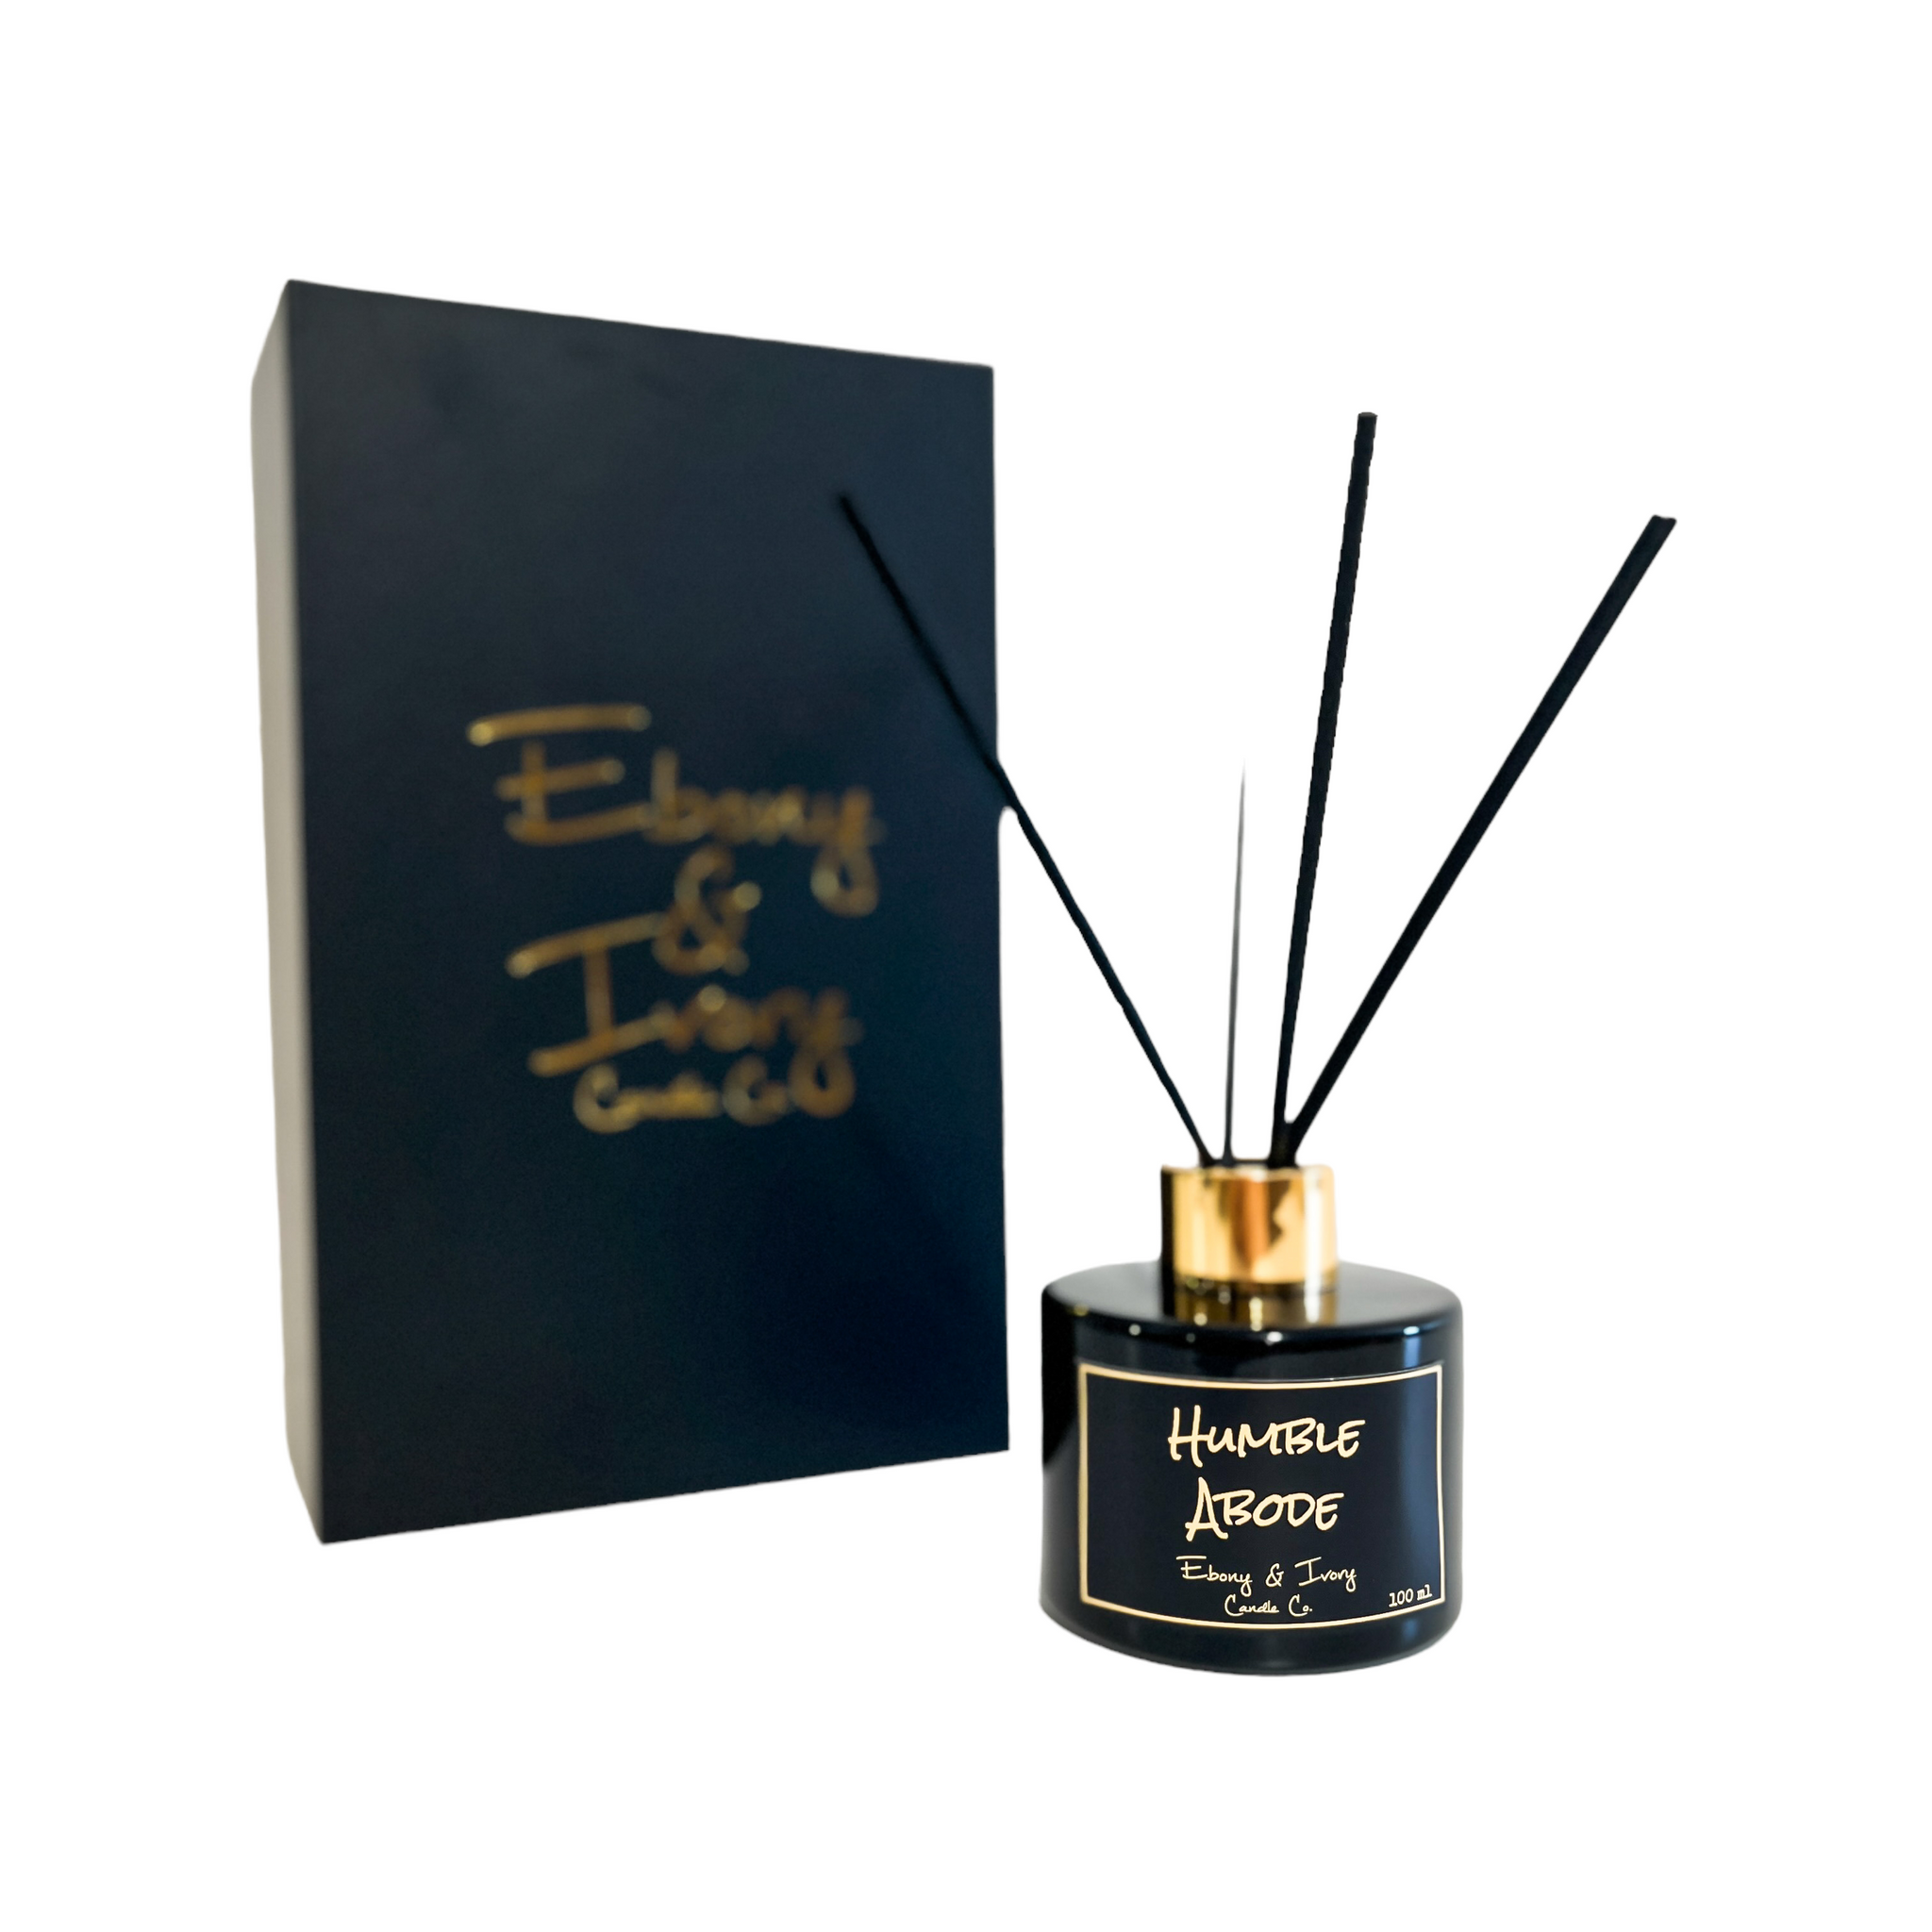 Black, one hundred milliliter, snickerdoodle, cupcake, vanilla, and brown sugar reed diffuser with a gold lid and a black label that reads Humble Abode